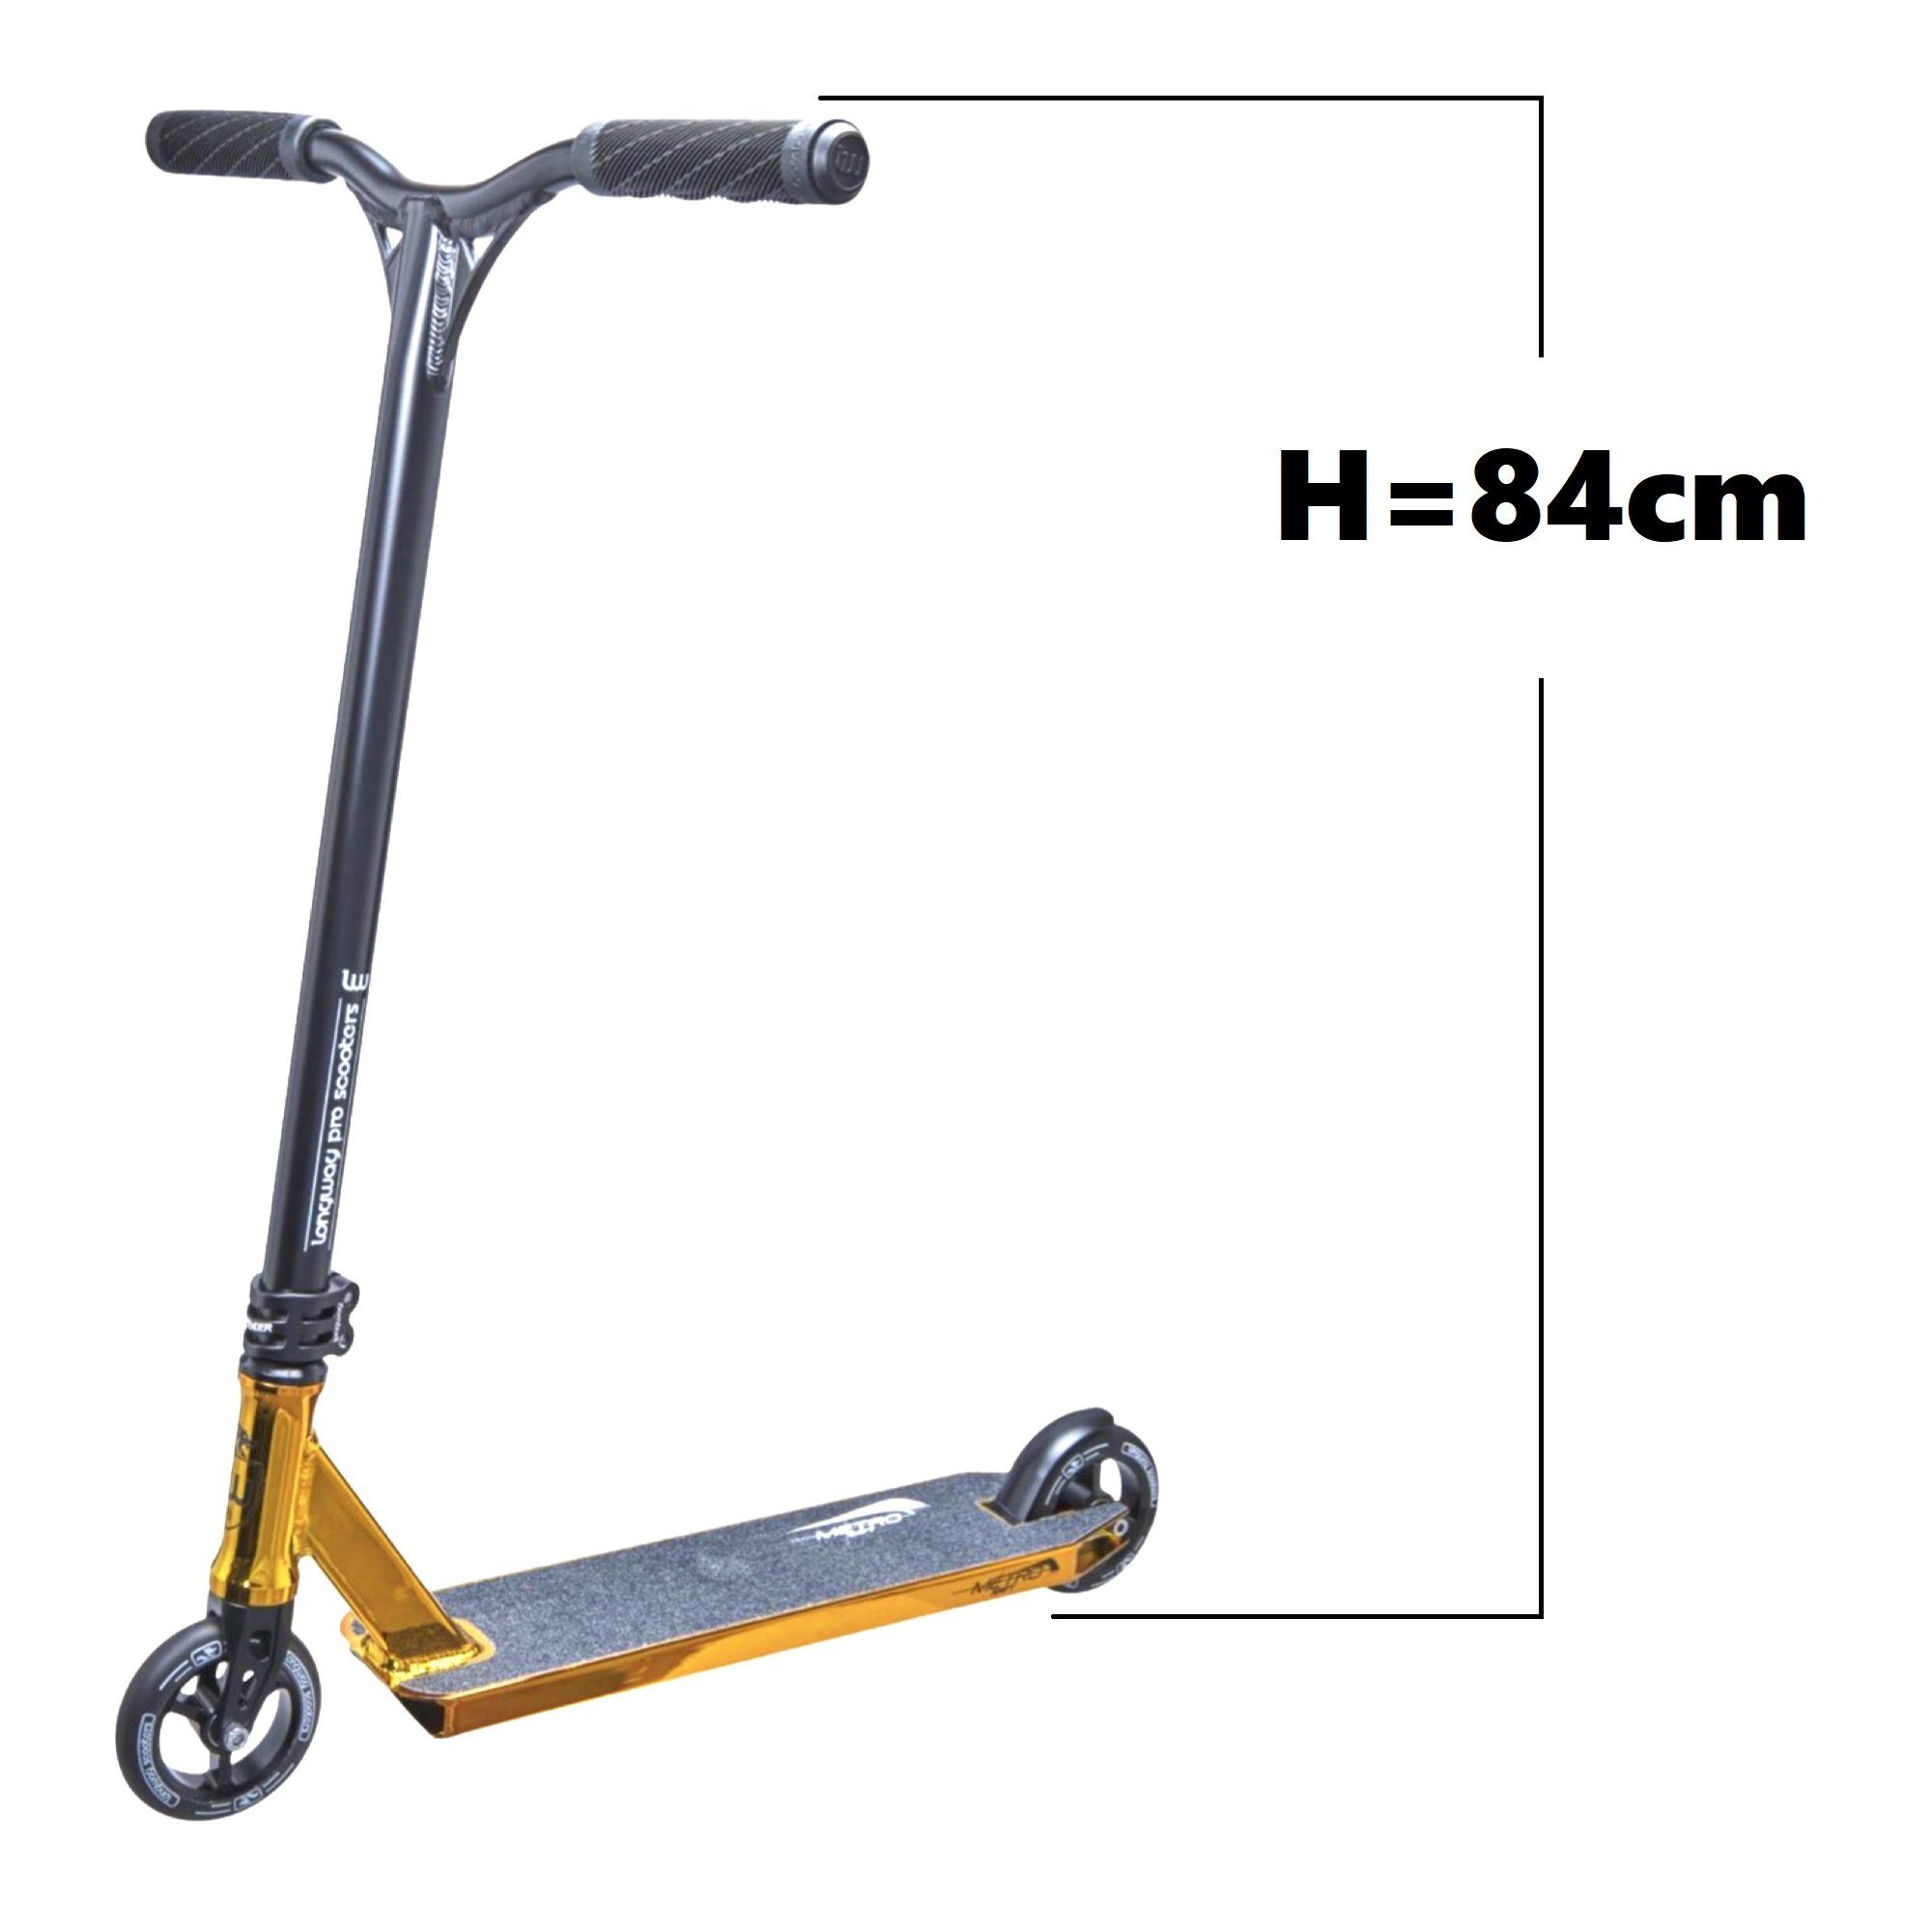 Stuntscooter Longway Longway Stunt-Scooter Shift Topaz H=84cm Metro Scooters